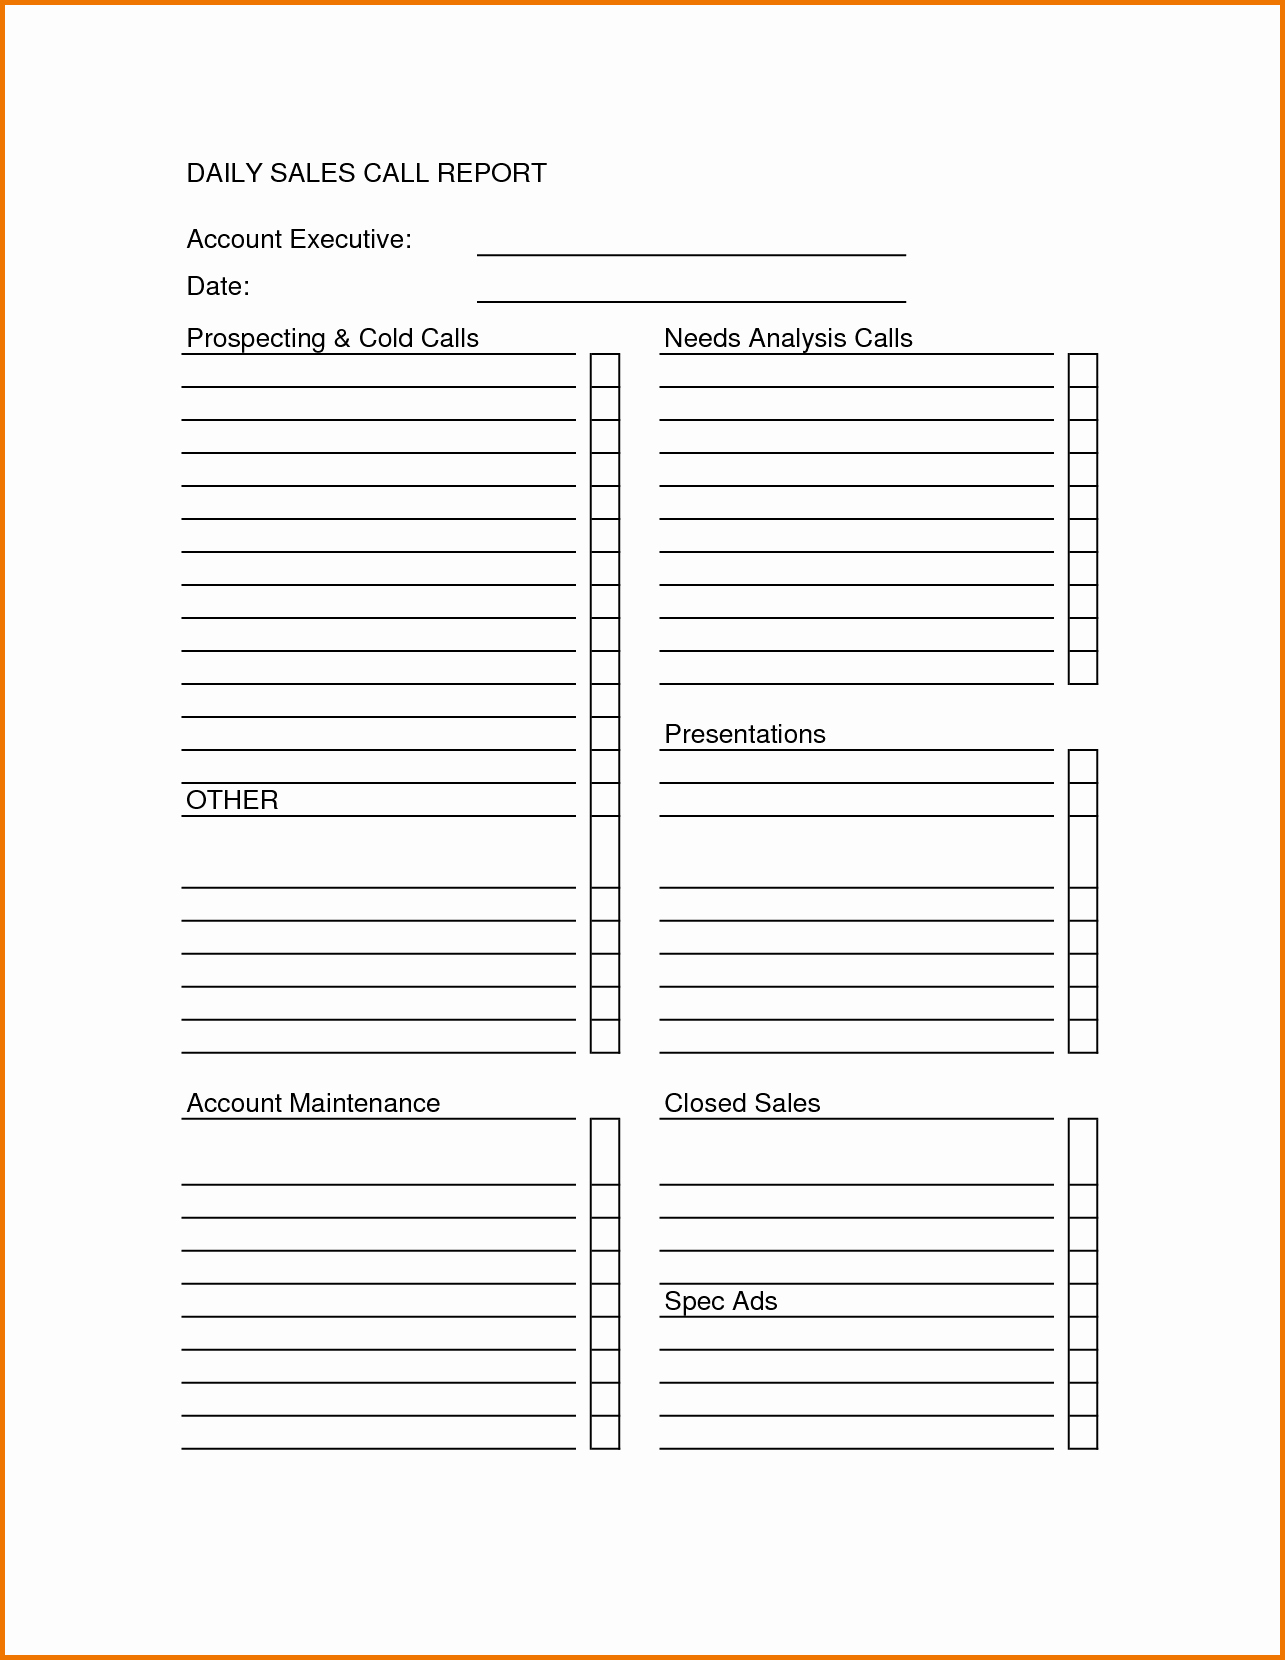 Daily Sales Call Sheet Template Elegant Sales Call Sheet Template Sales Call Report Sheet